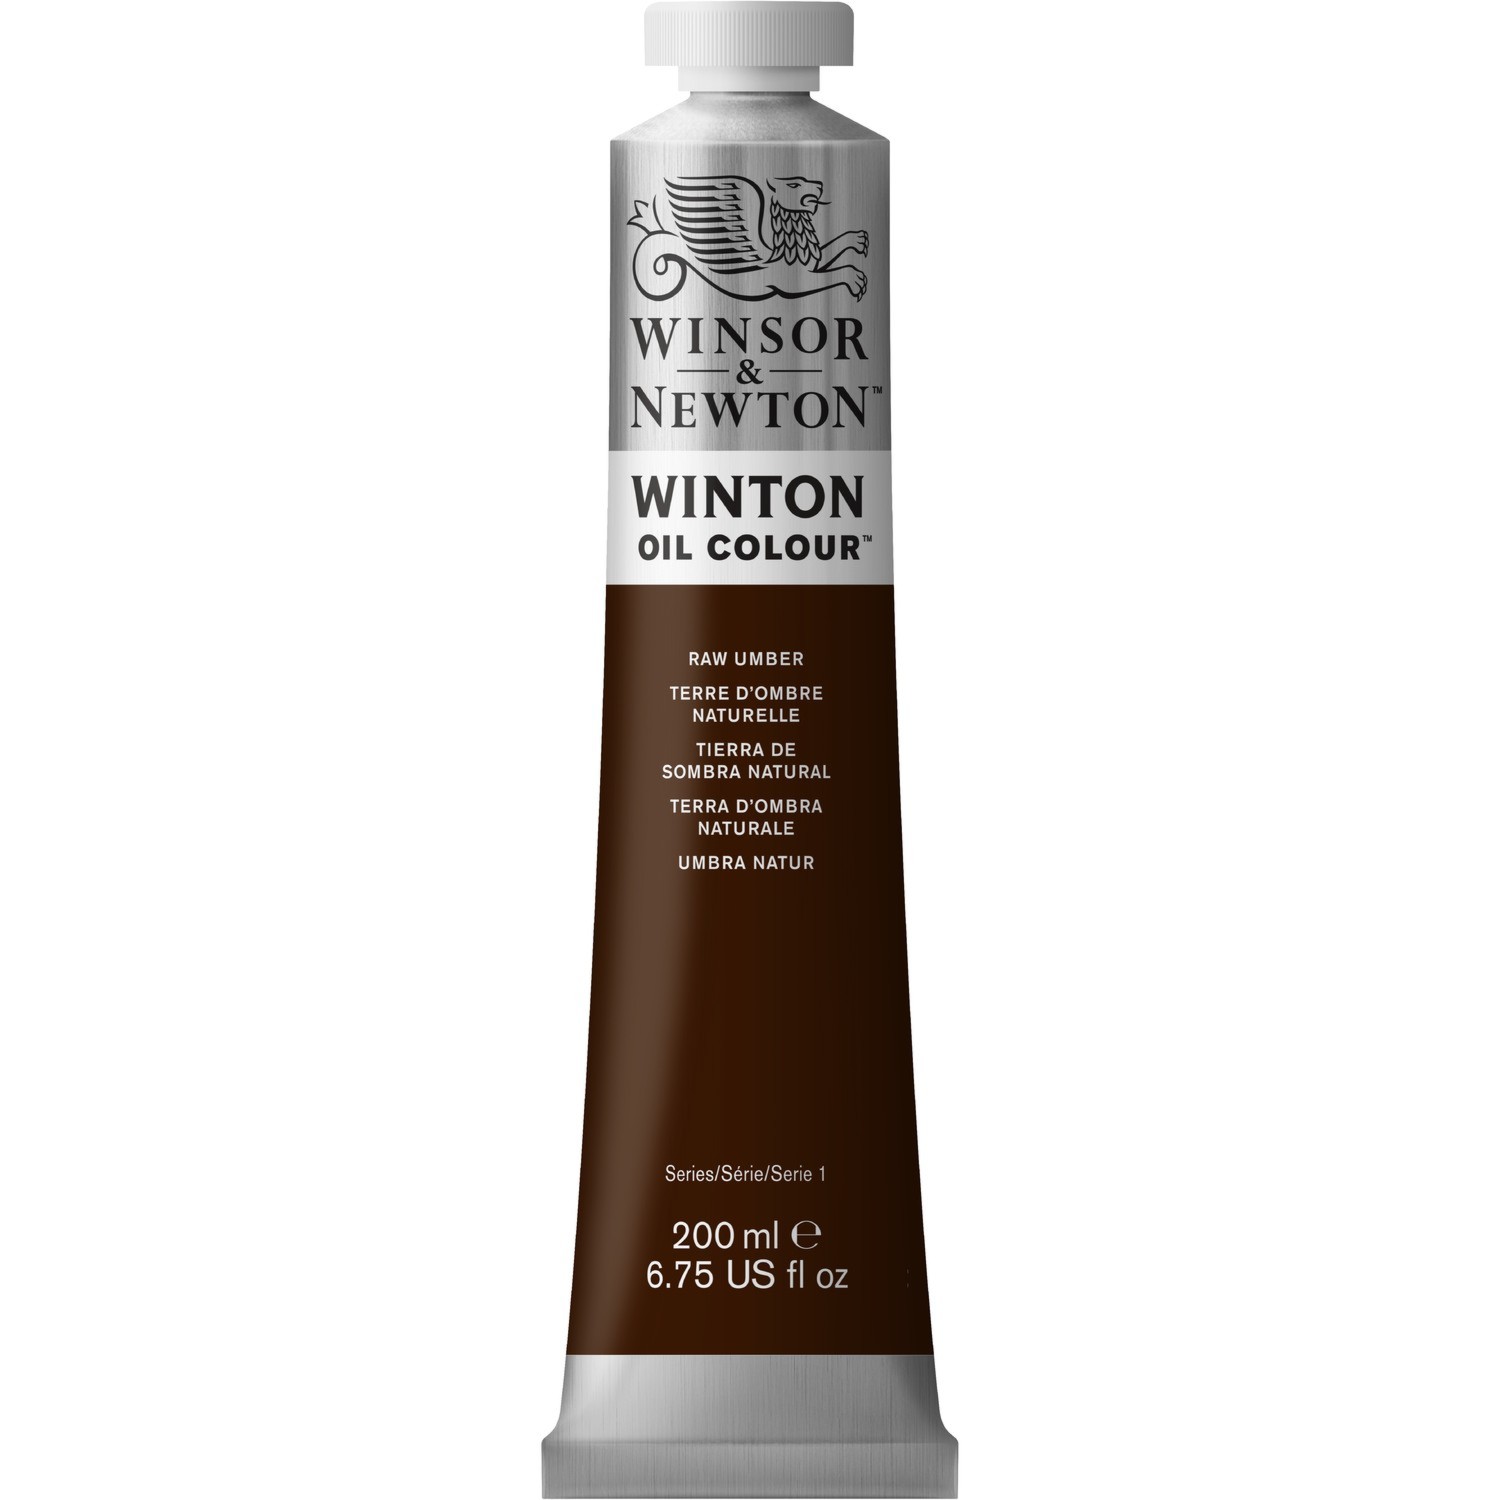 Winsor and Newton 200ml Winton Oil Colours - Raw Umber Image 1